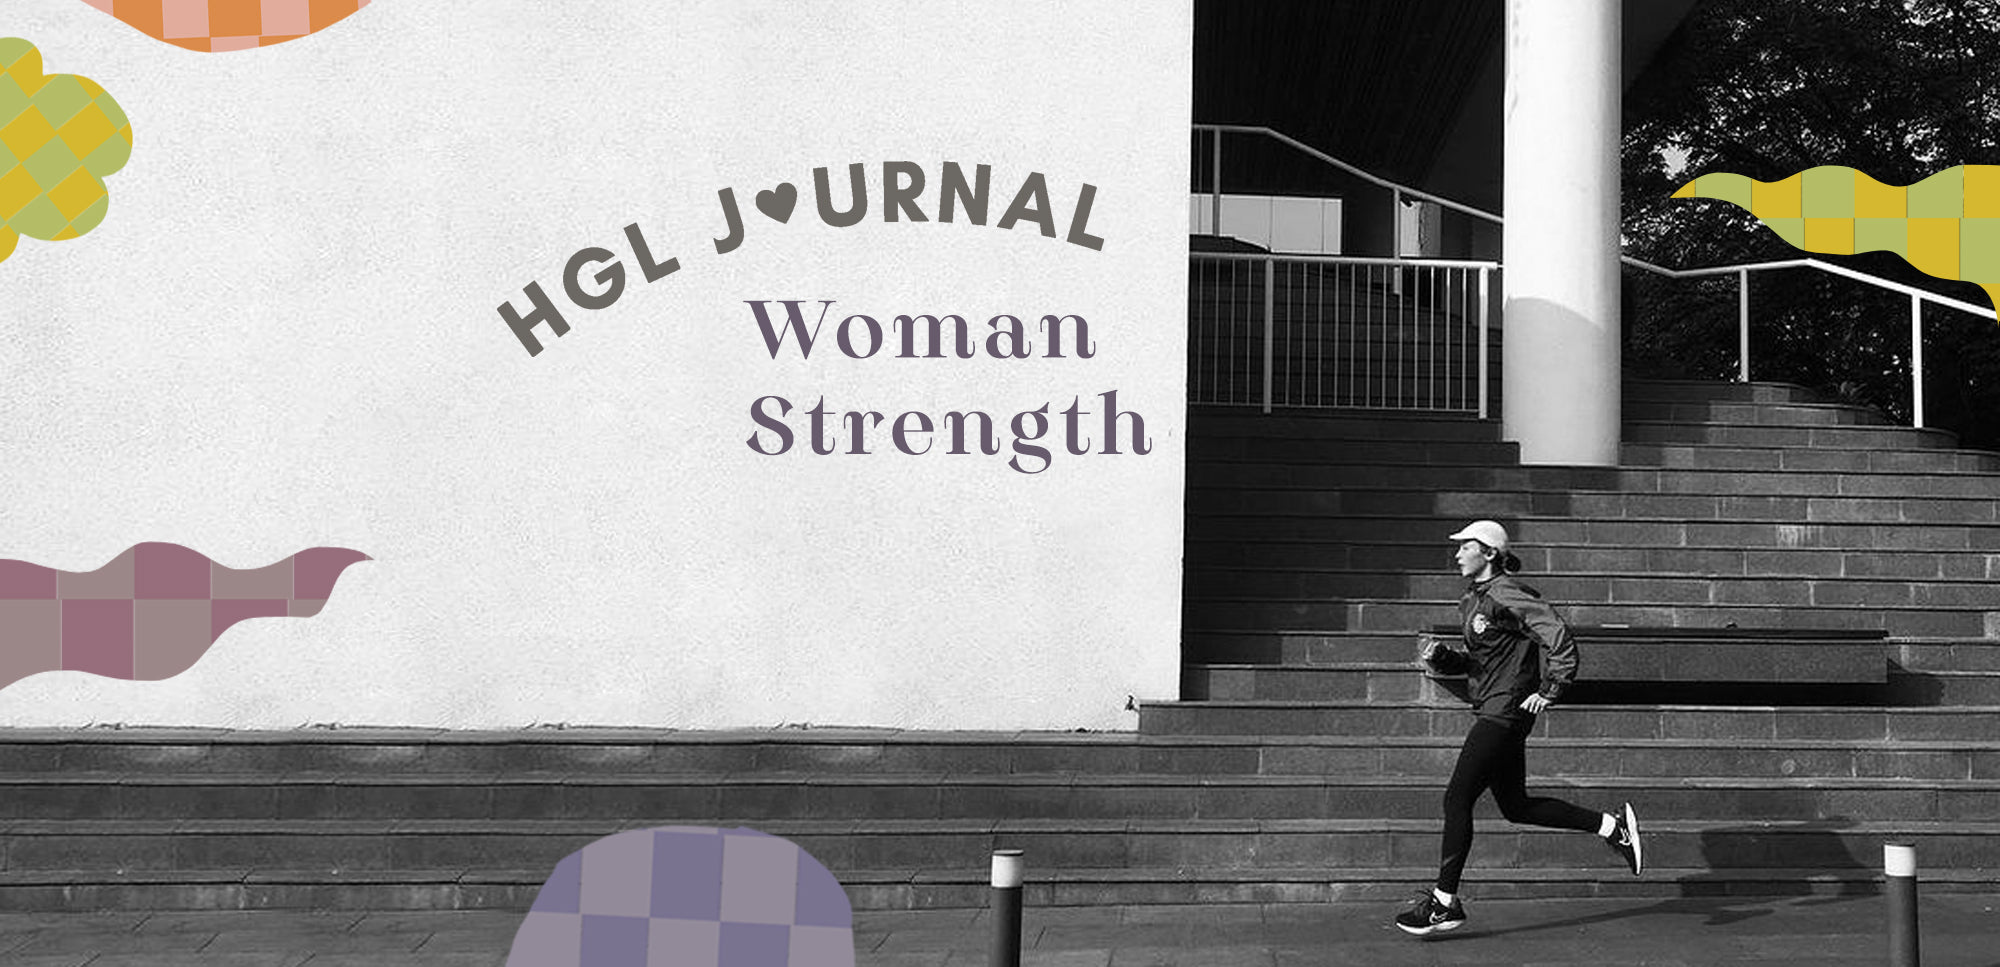 HGL JOURNAL : The Strength of A Woman Reflected on Woman Strength